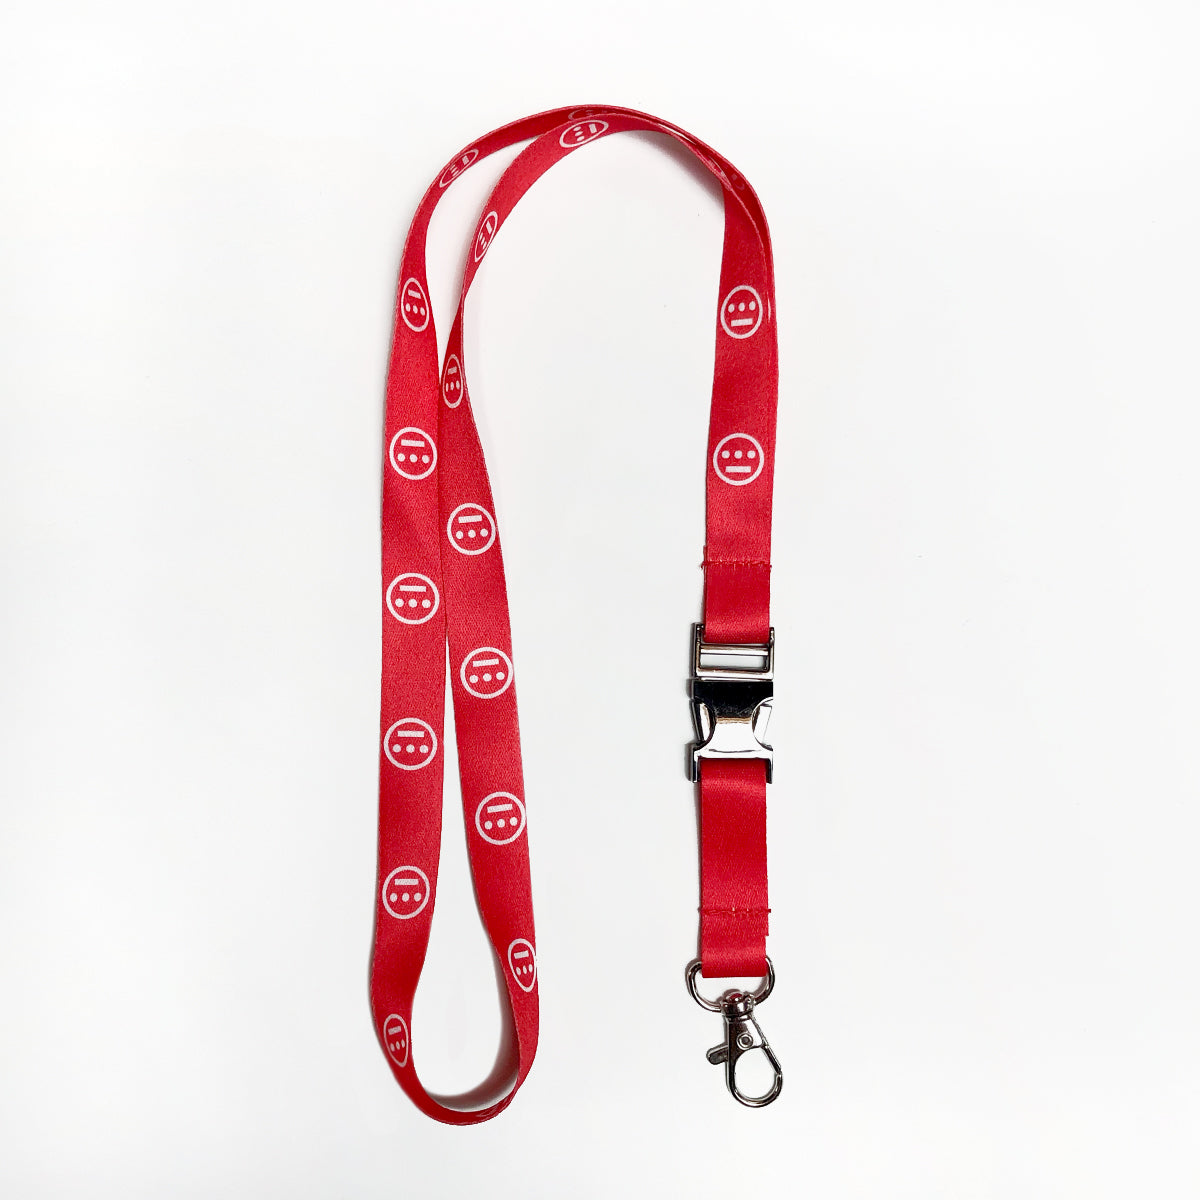 Red quick release lanyard with white Hieroglyphics logo on repeat. 